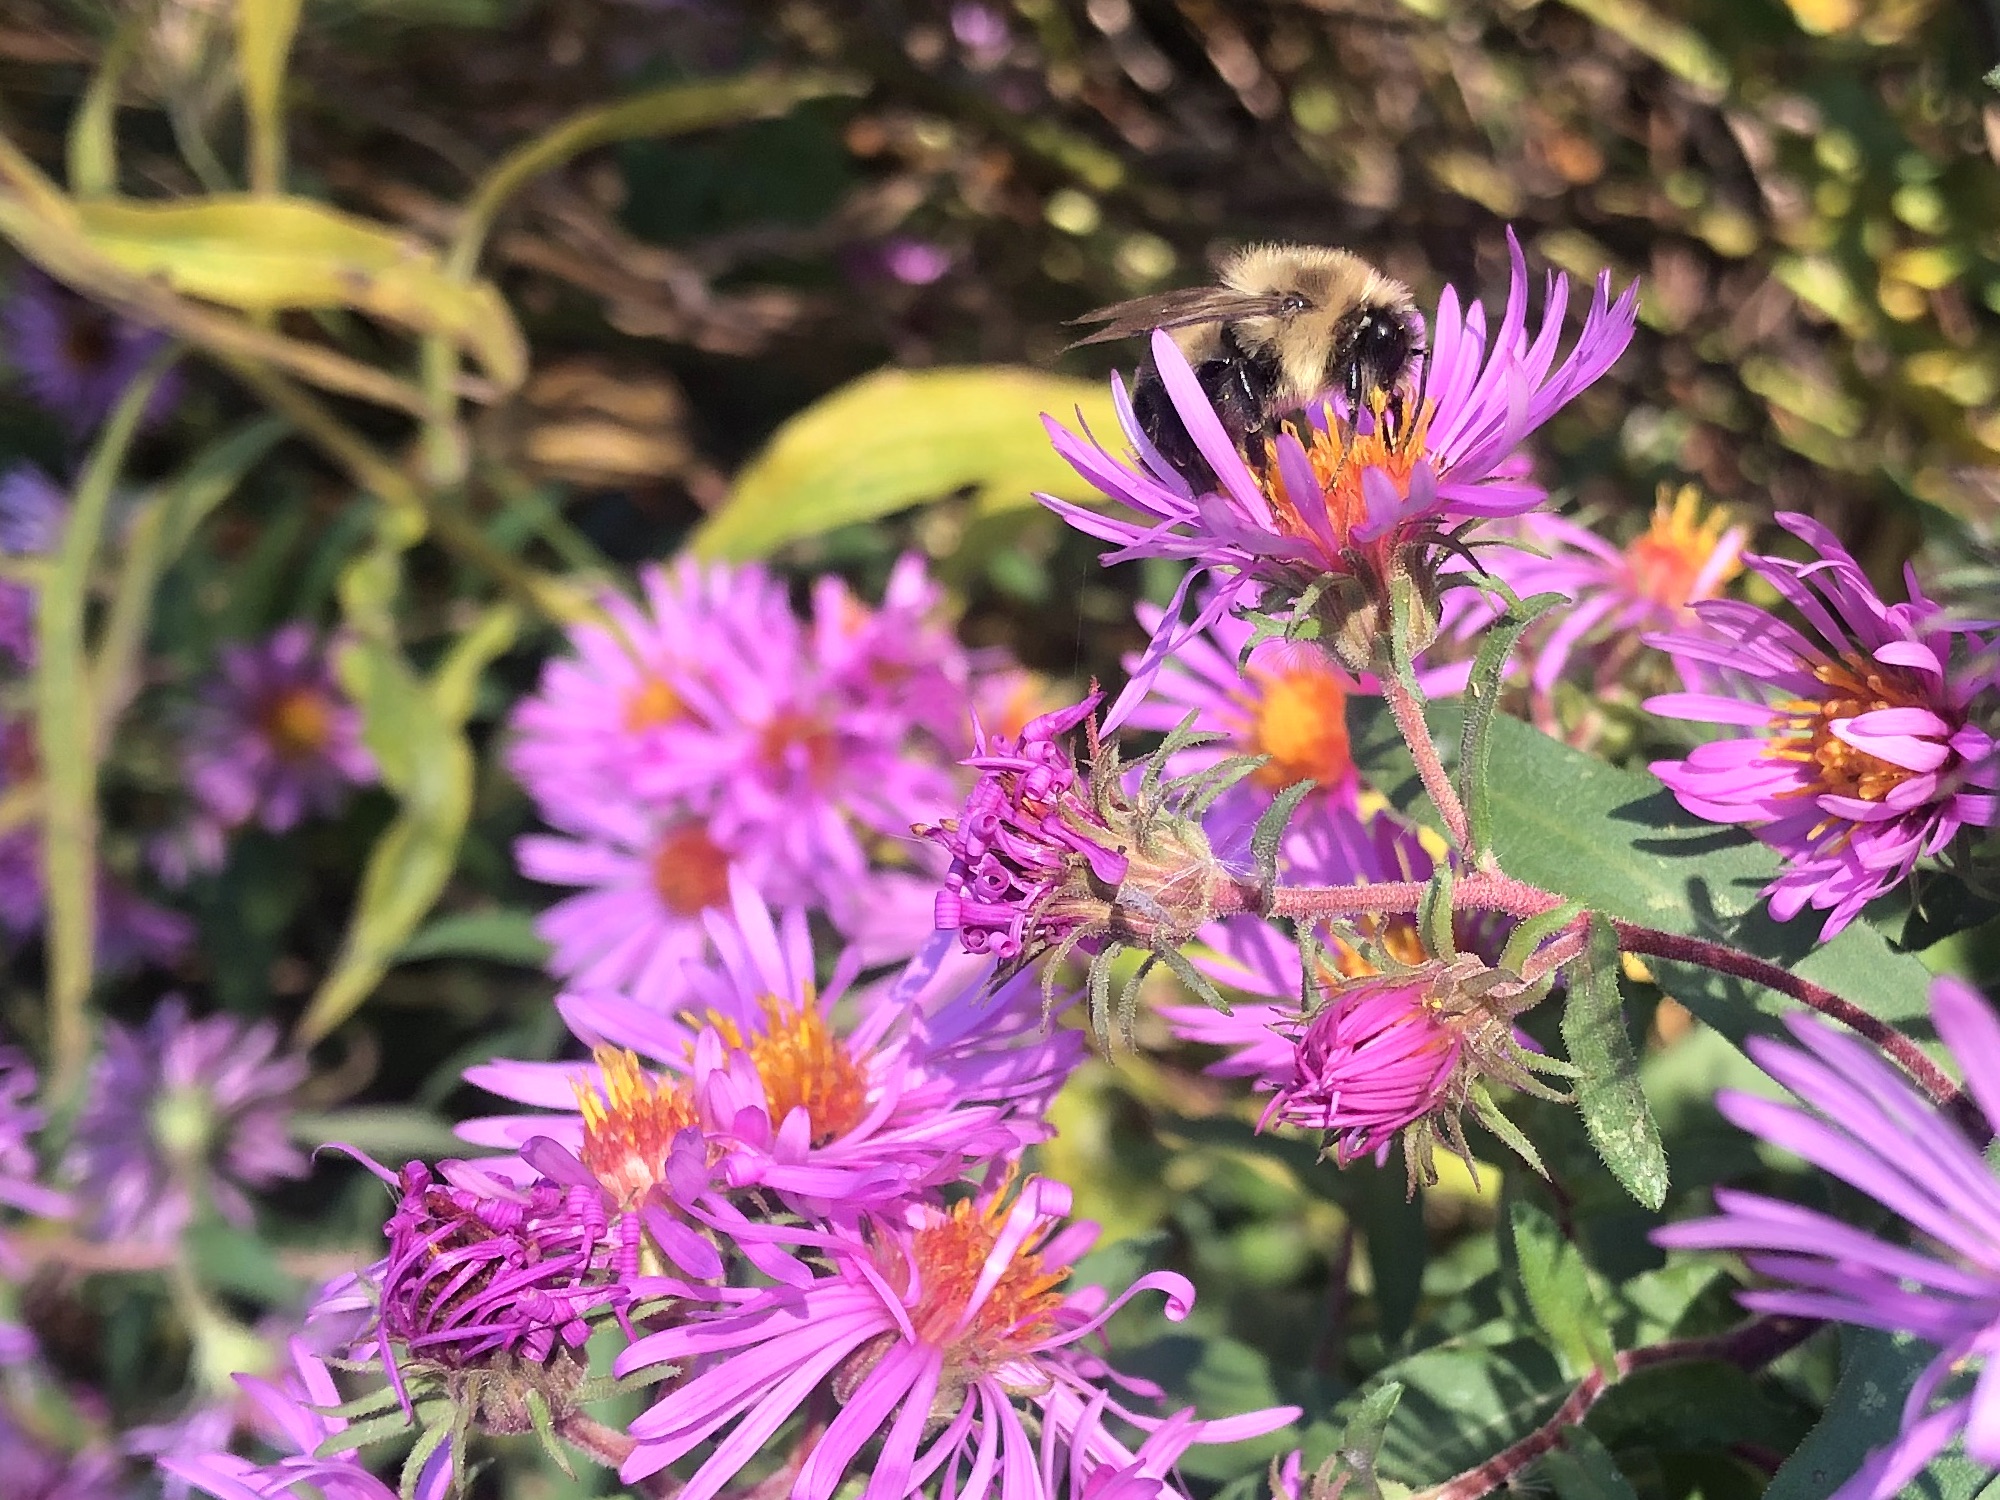 Bee on New England Aster on the bike path behind Gregory Street in Madison, Wisconsin on October 23, 2022.